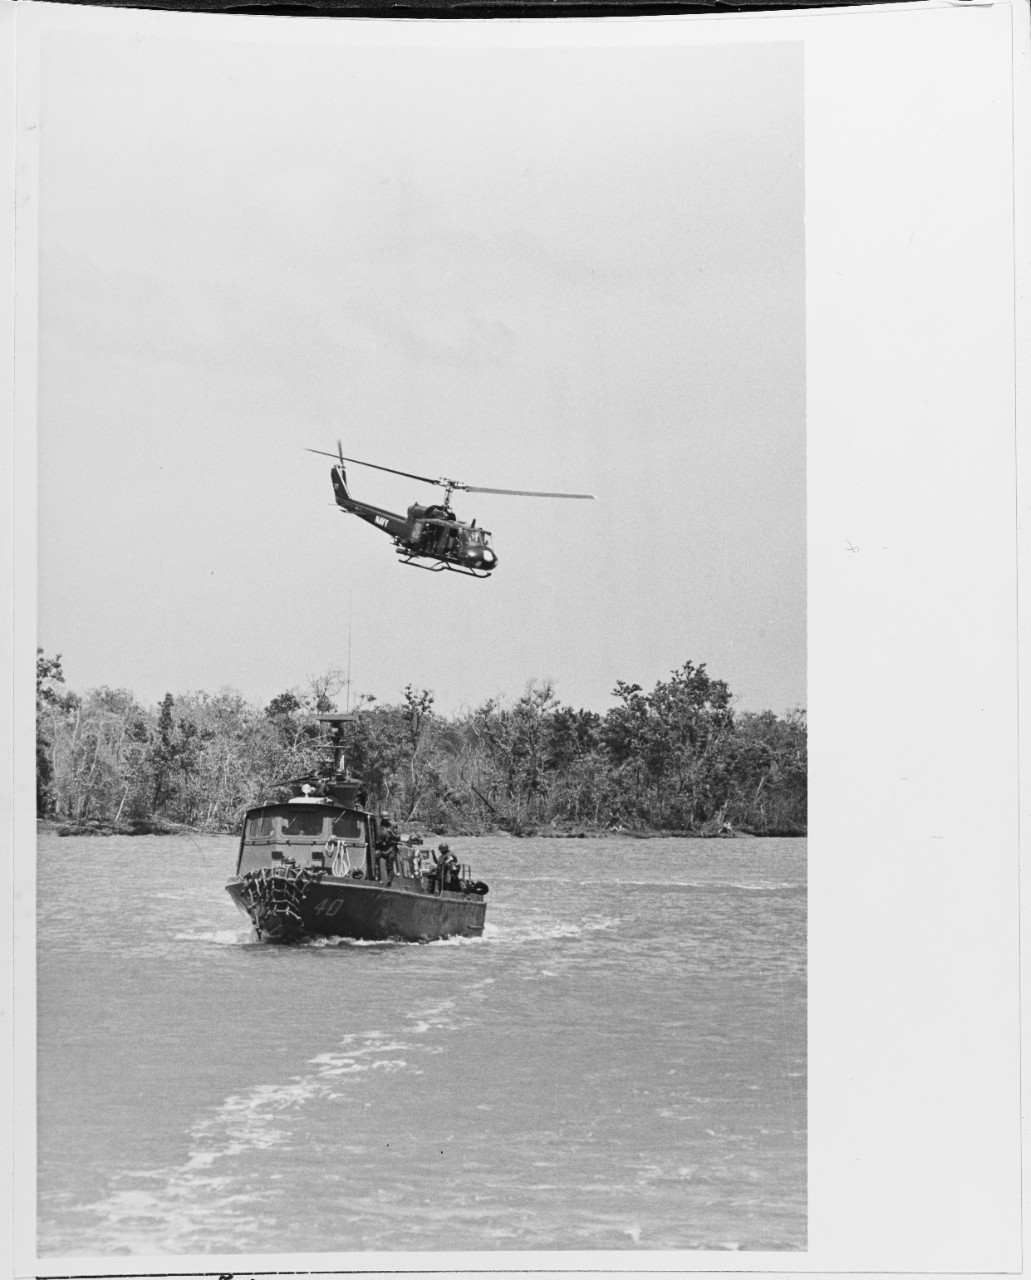 A UH-1 Iroquois helicopter flies near an inshore PCF on the Cualon River.